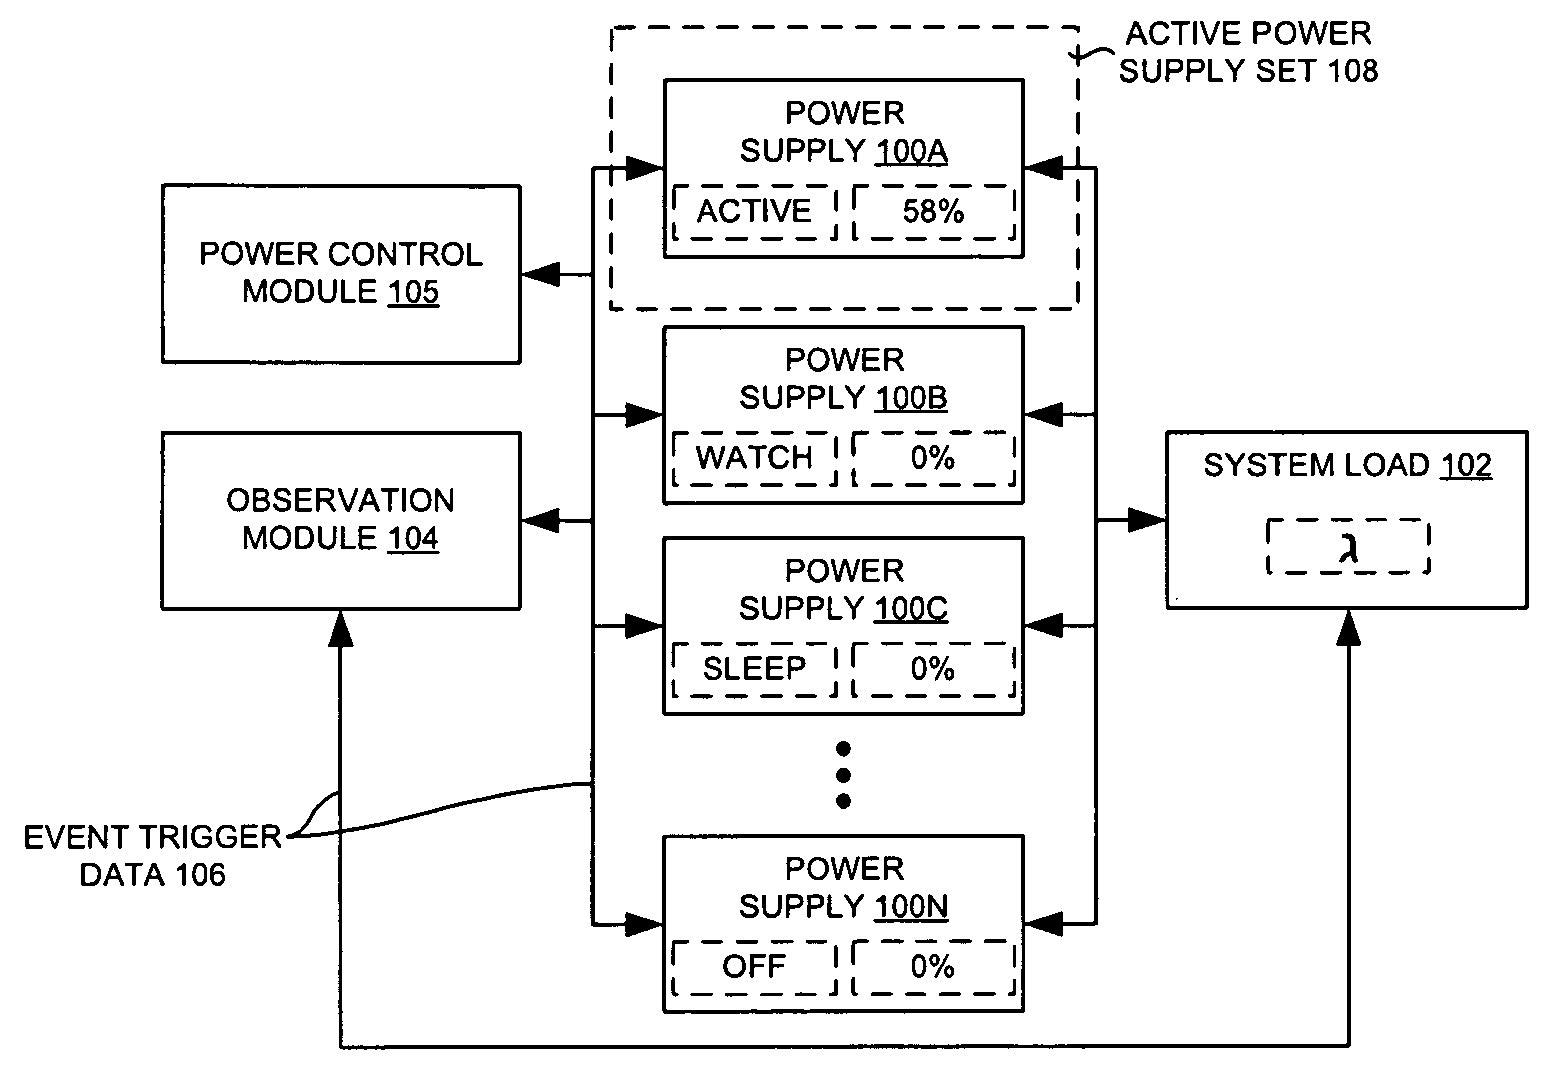 Adaptation of an active power supply set using an event trigger